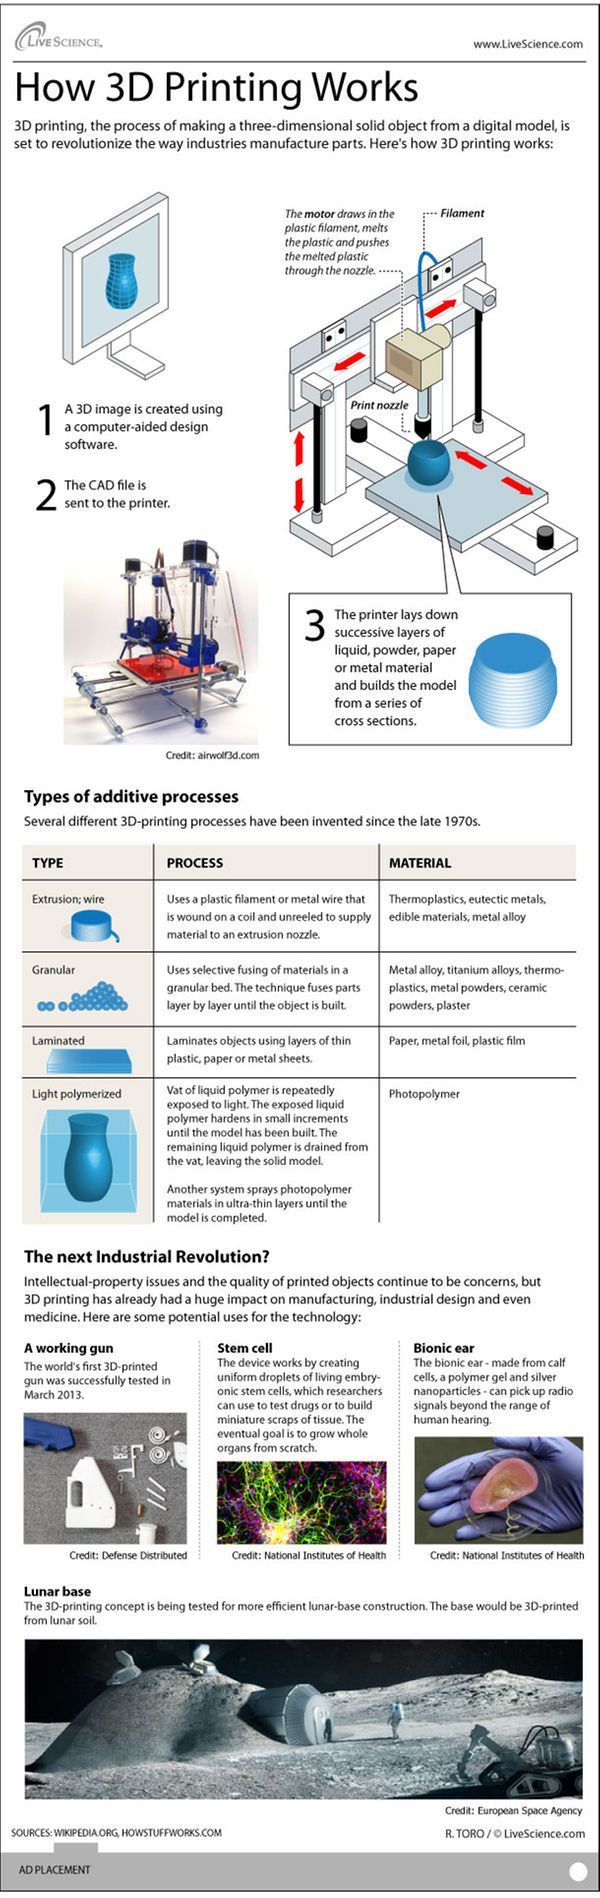 How 3D Printers Work (Infographic) Maybe something for 3D Printer Chat?